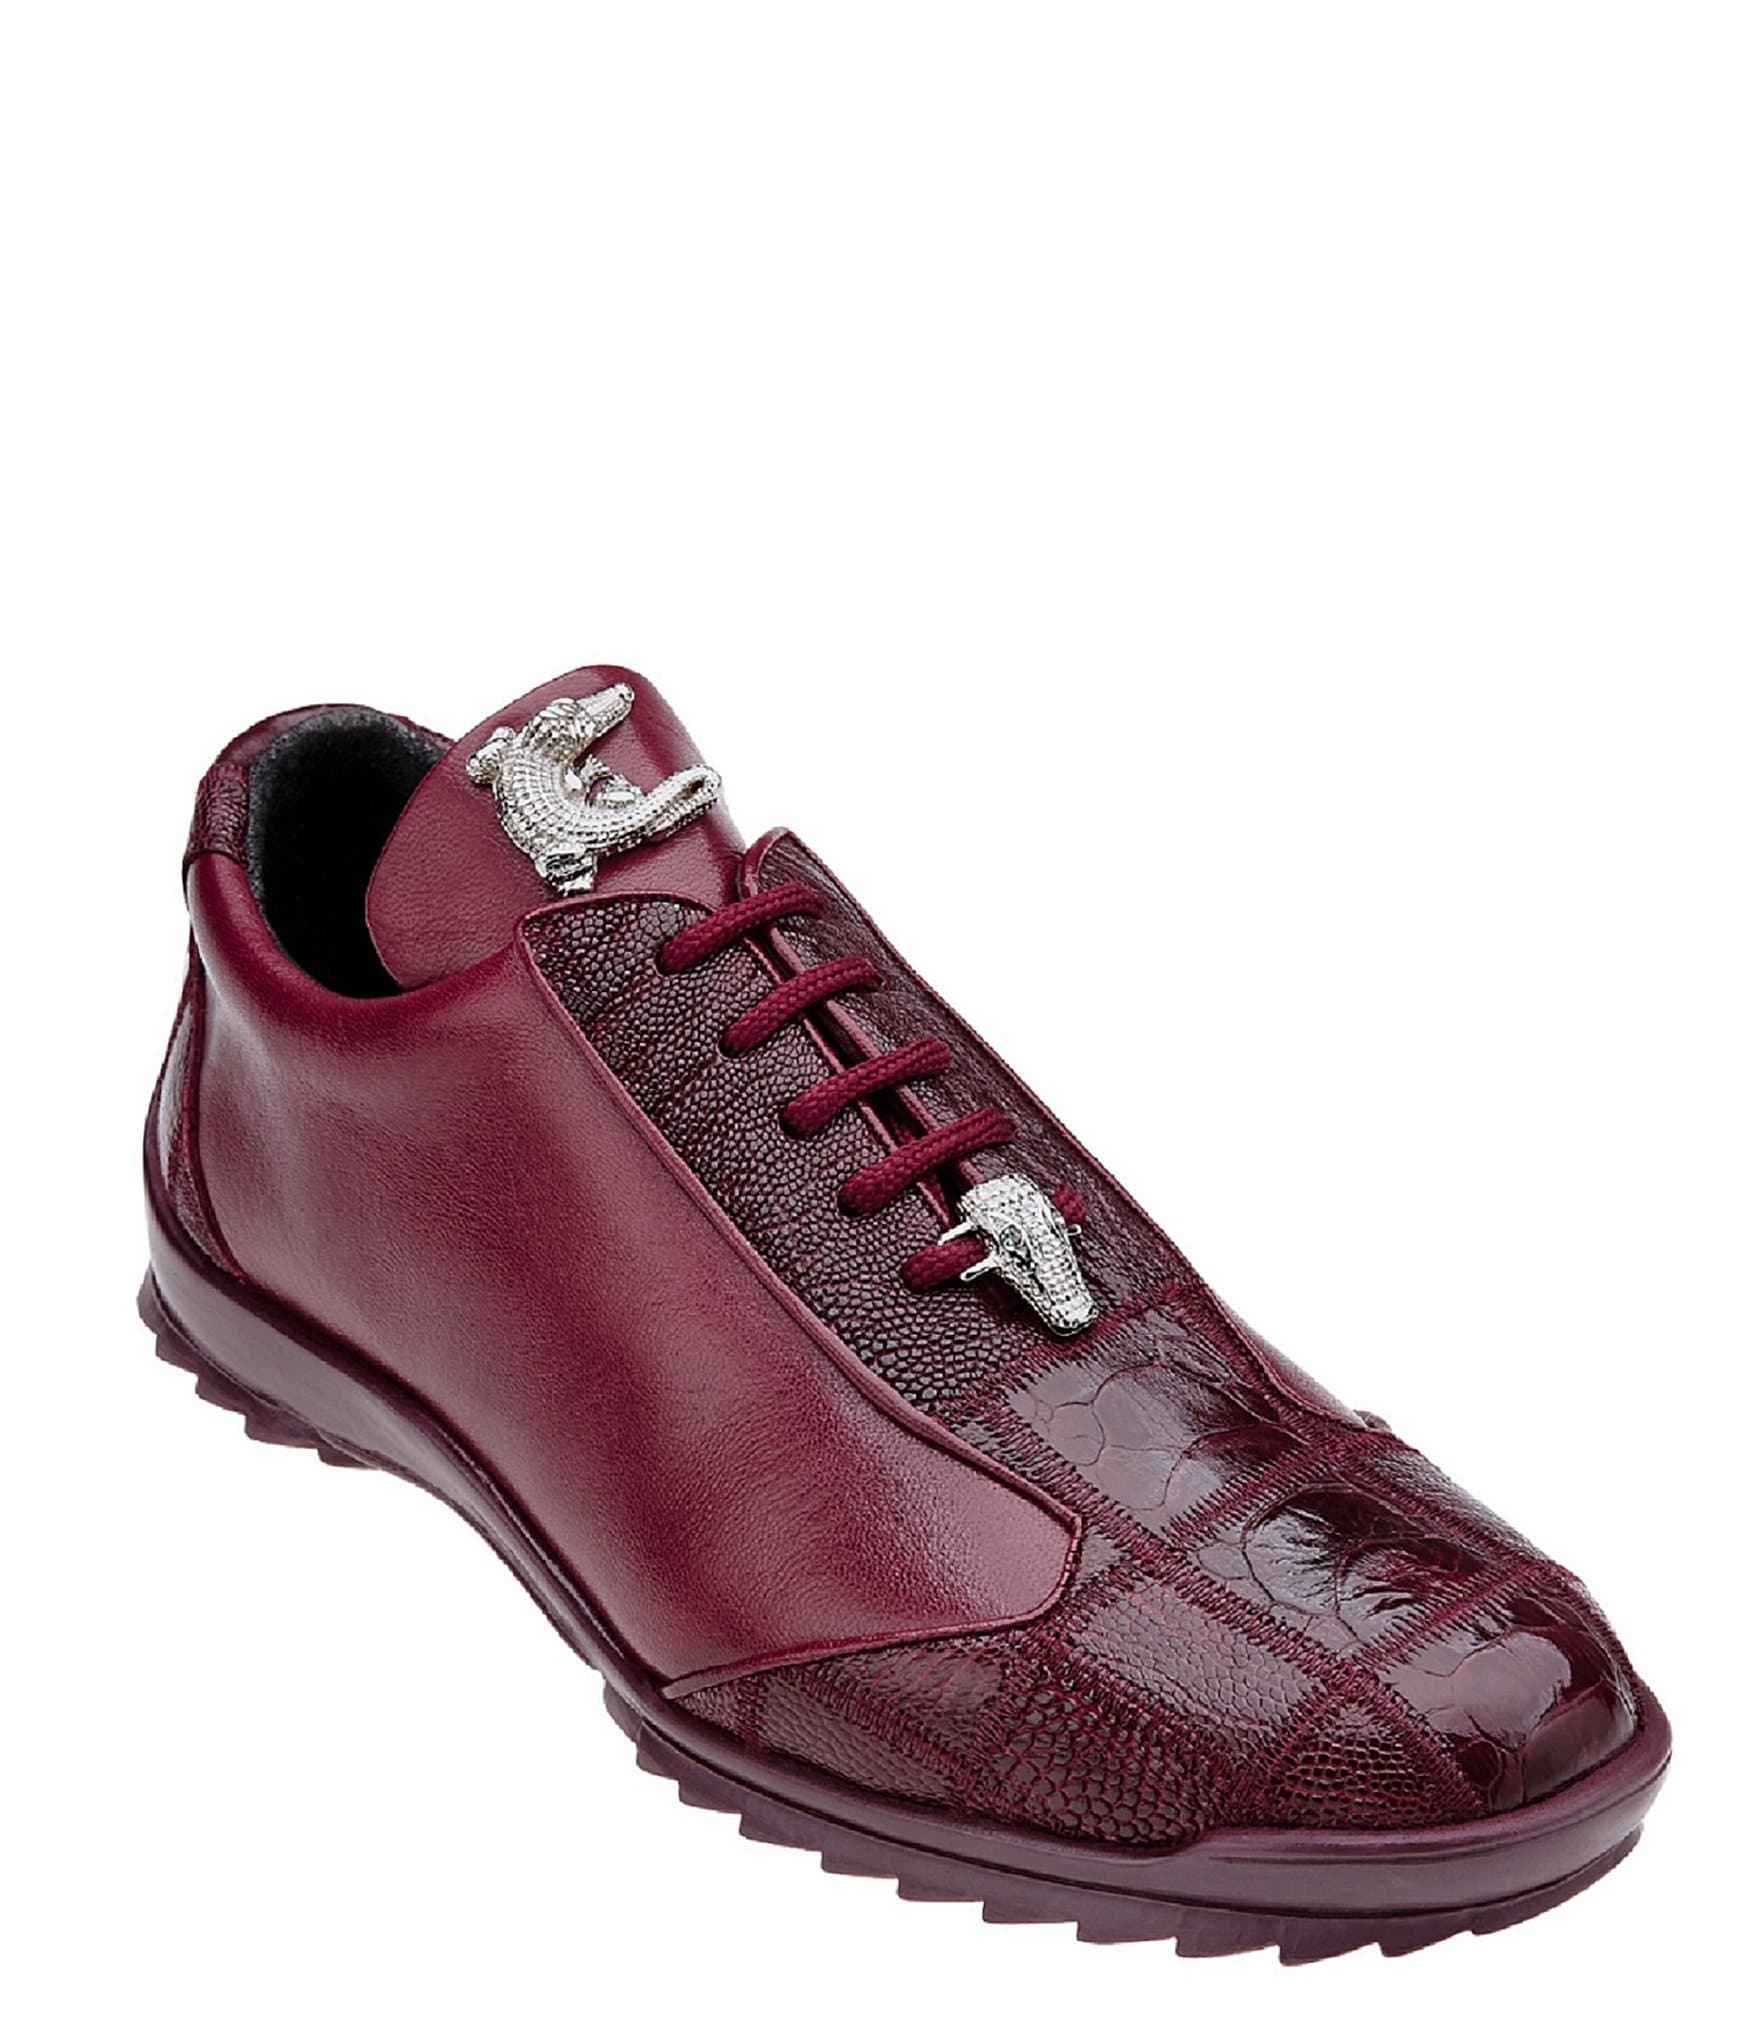 black and burgundy dress shoes